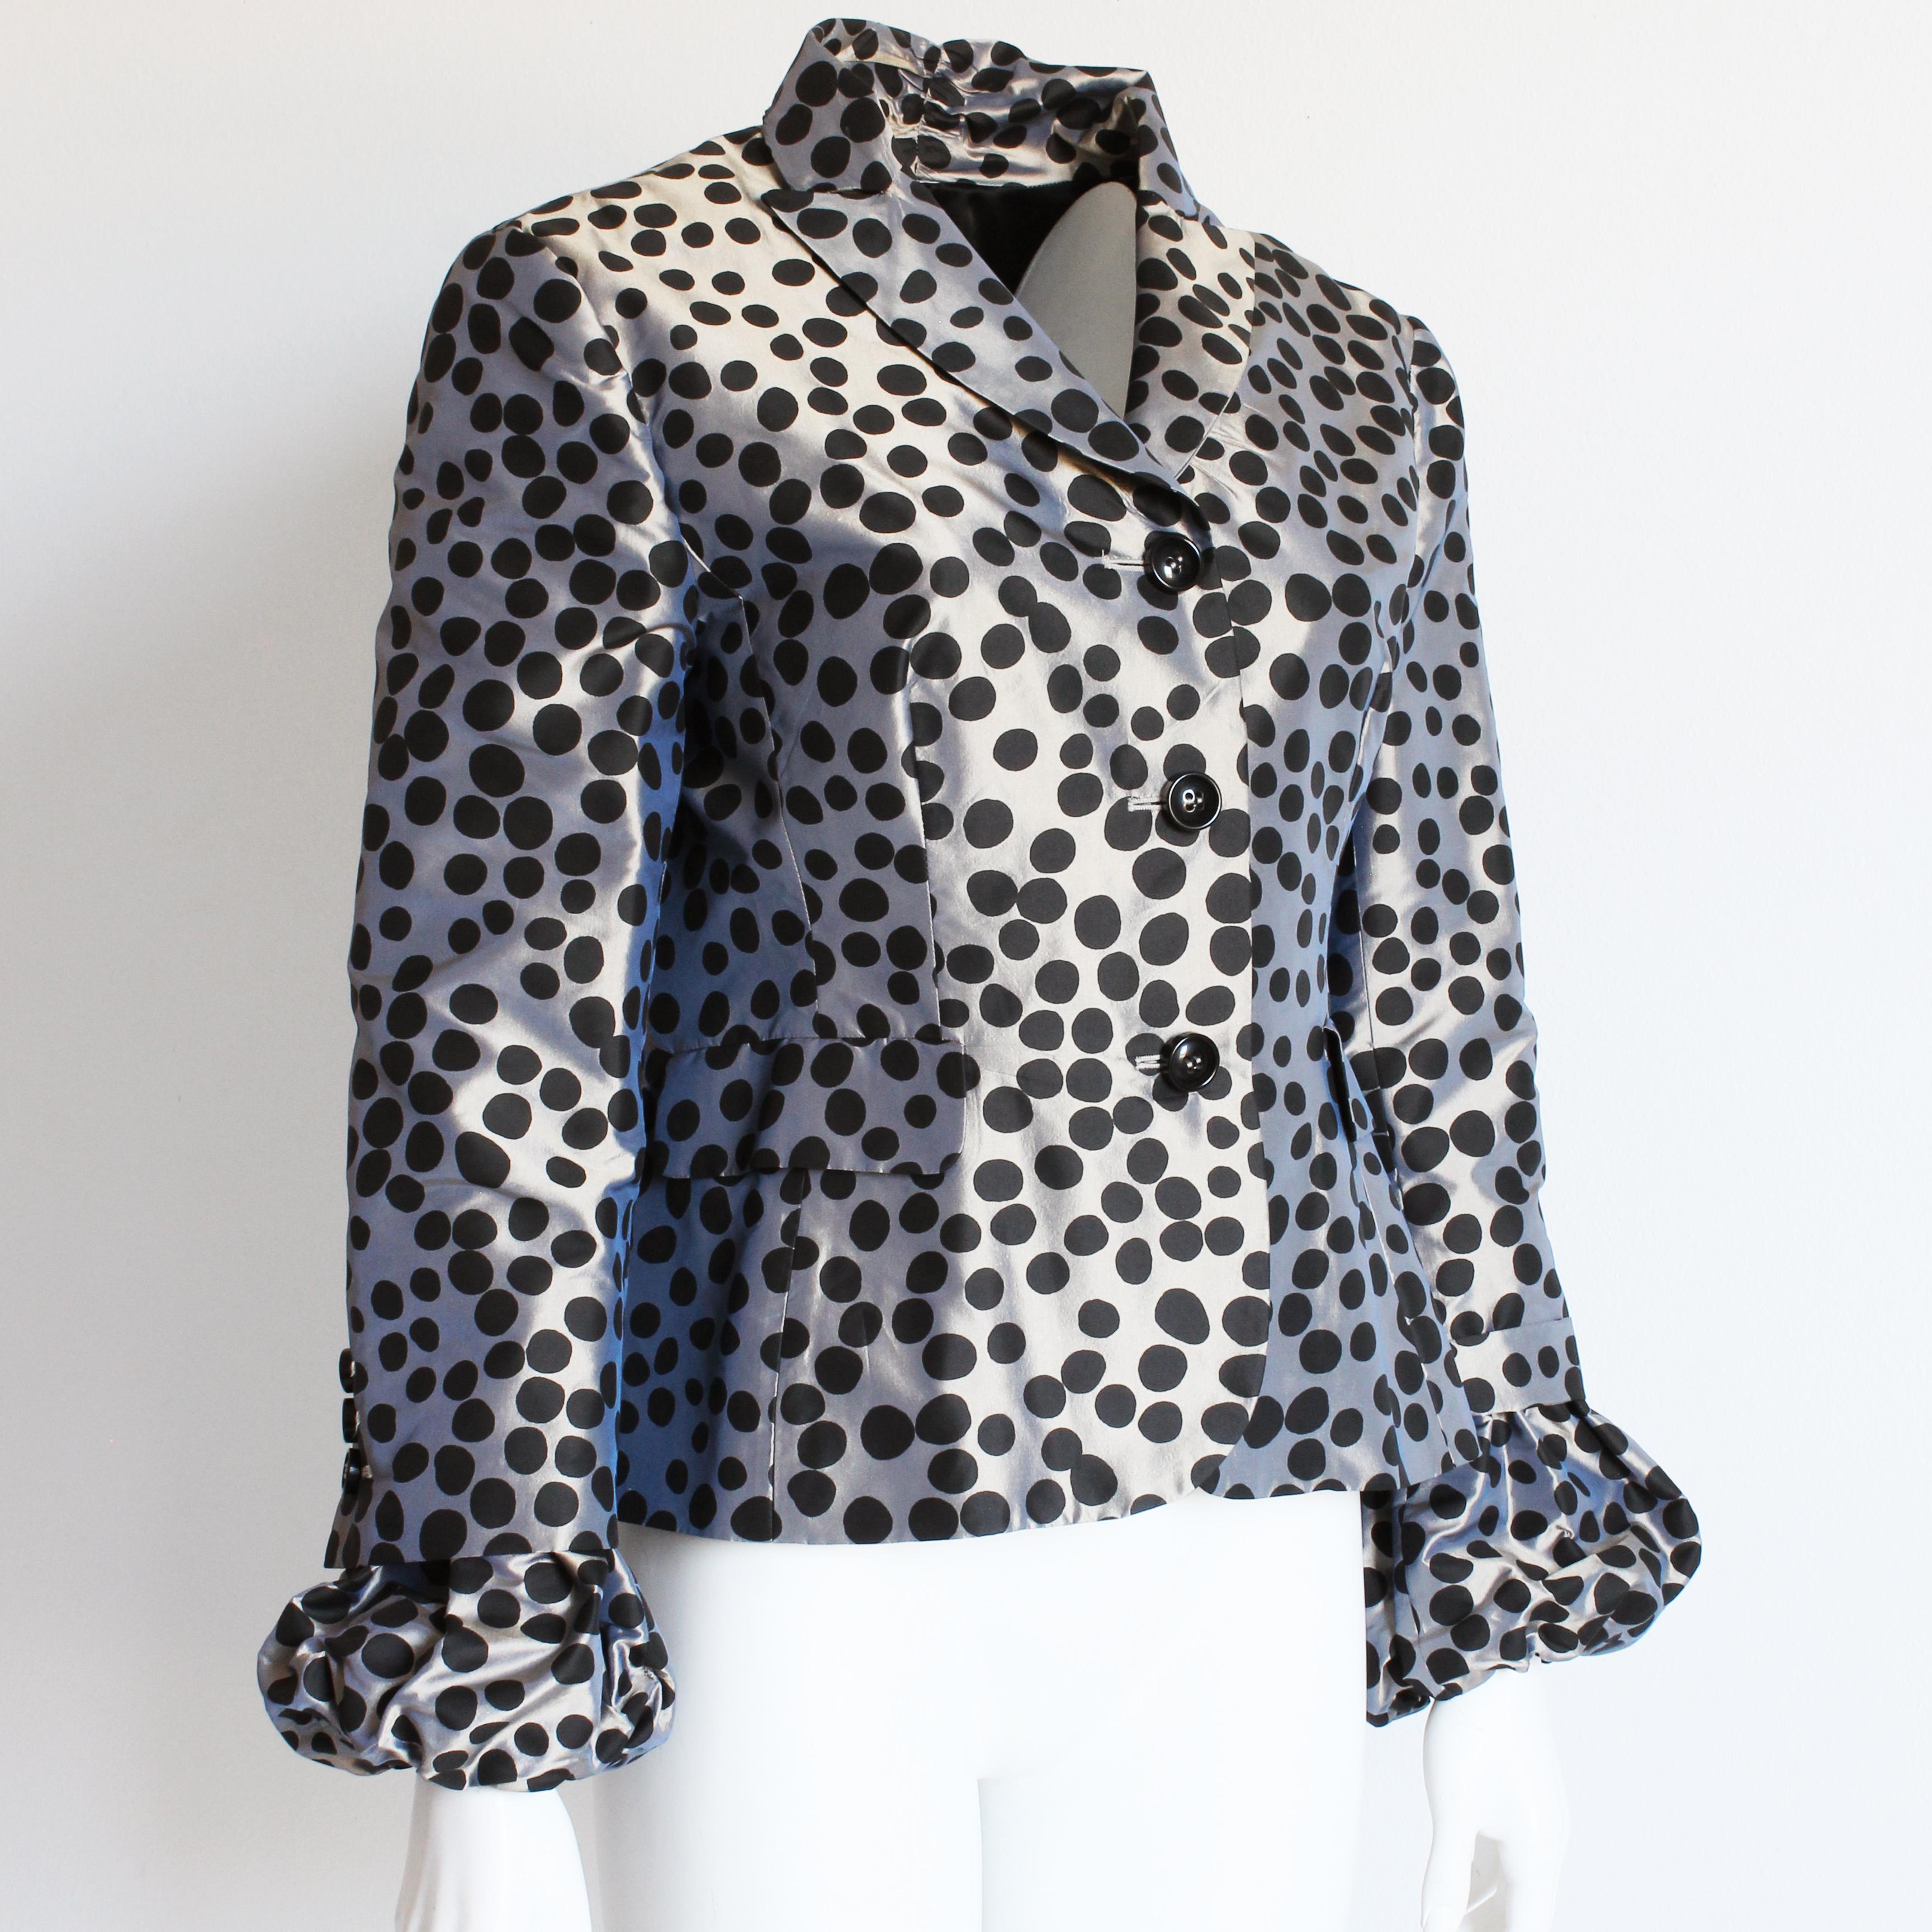 Moschino Jacket Gunmetal Silk with Polka Dots Puff Sleeves Cheap and Chic US 12 In Good Condition For Sale In Port Saint Lucie, FL